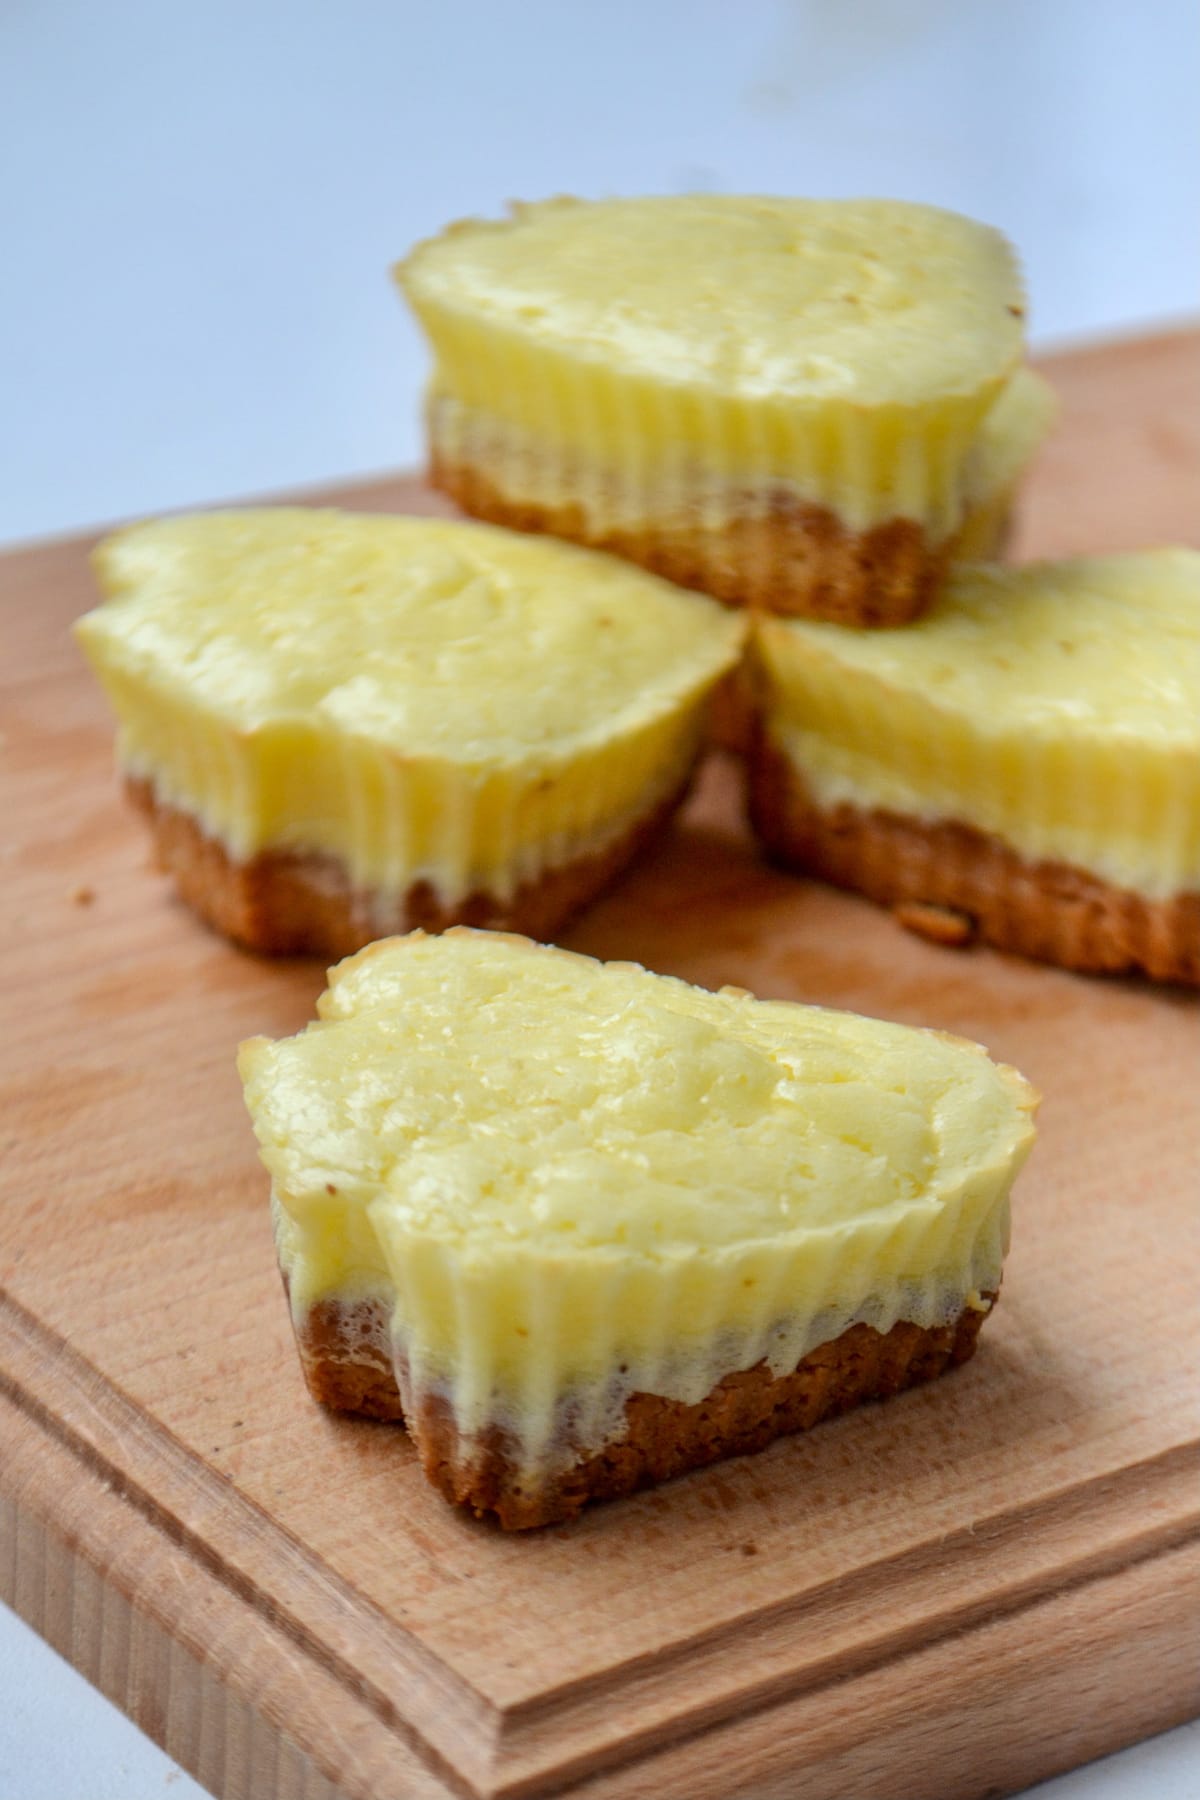 Keto cheesecake bites without toppings